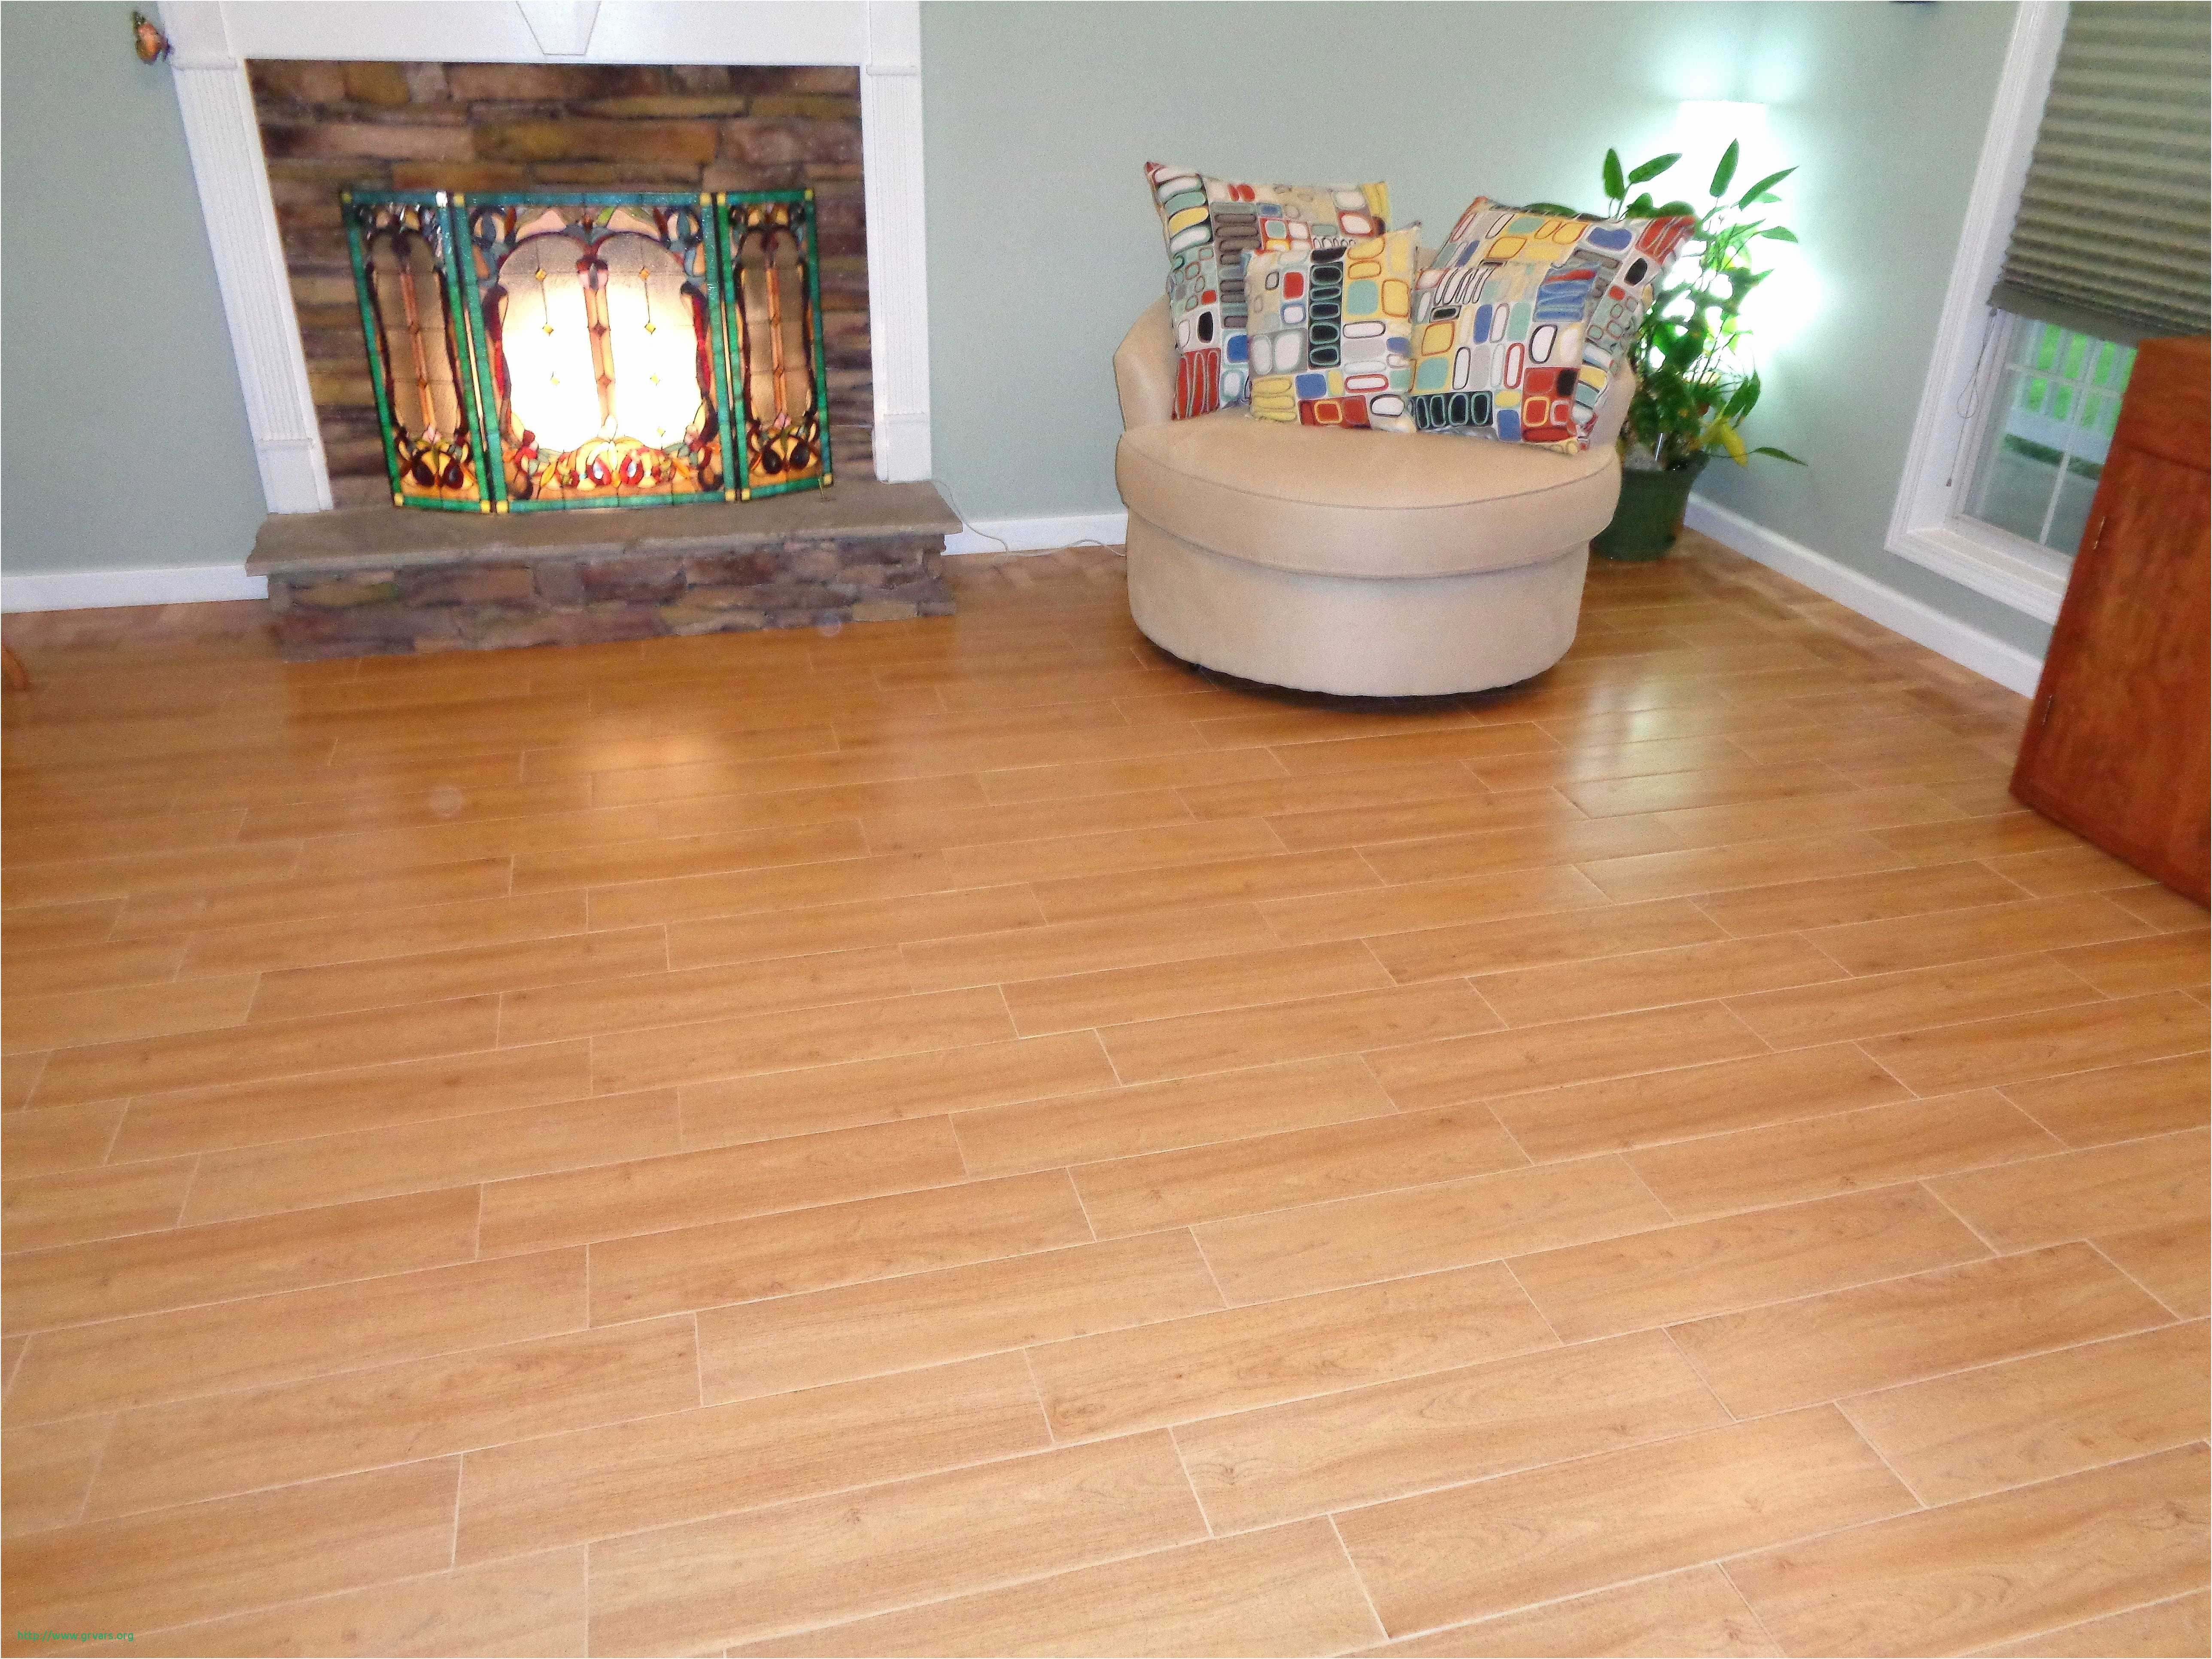 hardwood flooring wholesale chicago of 20 impressionnant cheapest place to buy hardwood flooring ideas blog throughout cheapest place to buy hardwood flooring inspirant laminated wooden flooring prices guide to solid hardwood floors